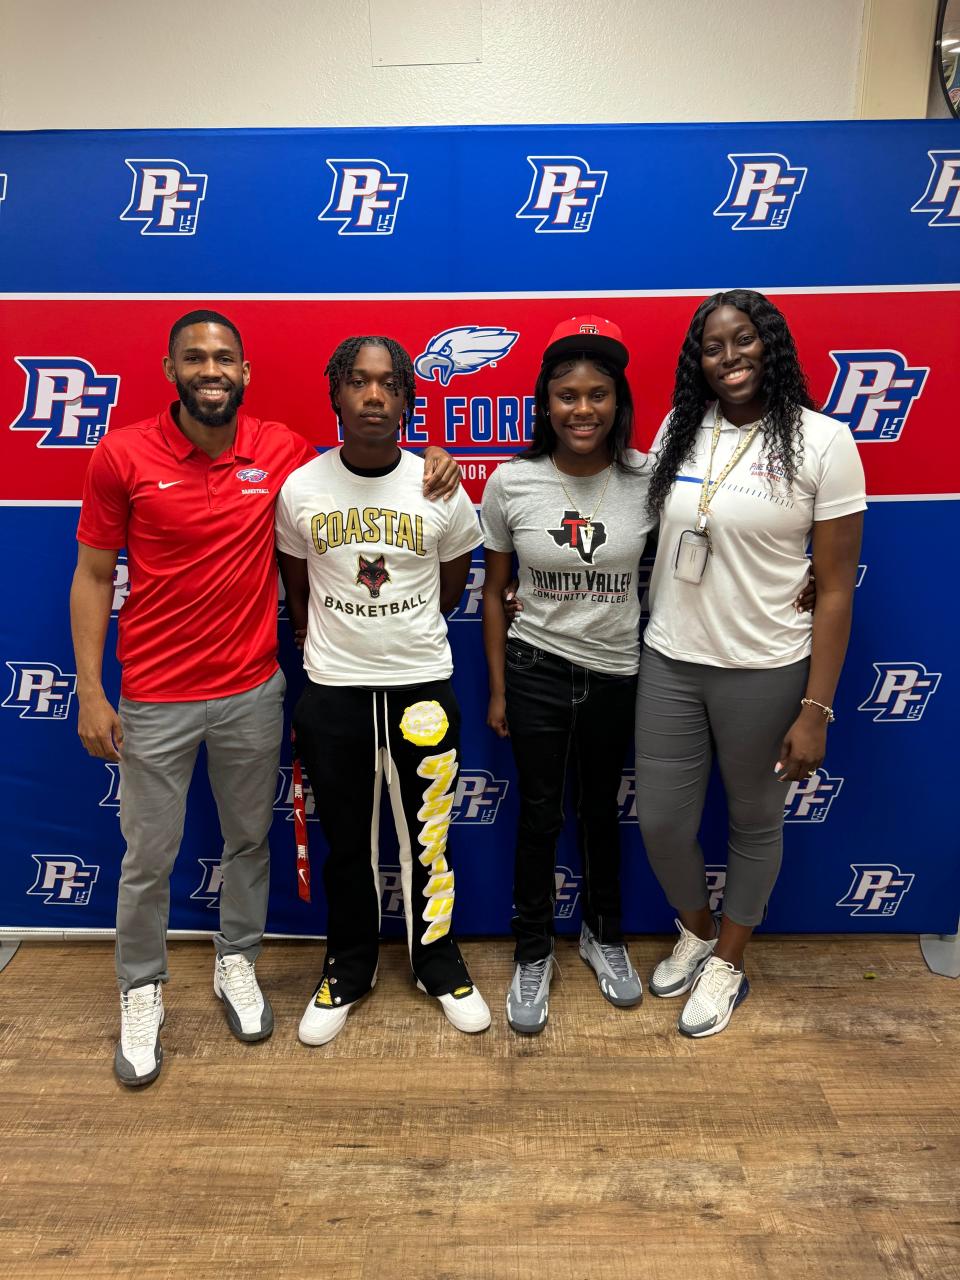 Pine Forest basketball standouts Maurice Smith (second from left) and Niylia Wilkins (second from right) both signed to play college basketball. Smith is headed to Coastal Alabama North and Wilkins will play at Trinity Valley Community College.